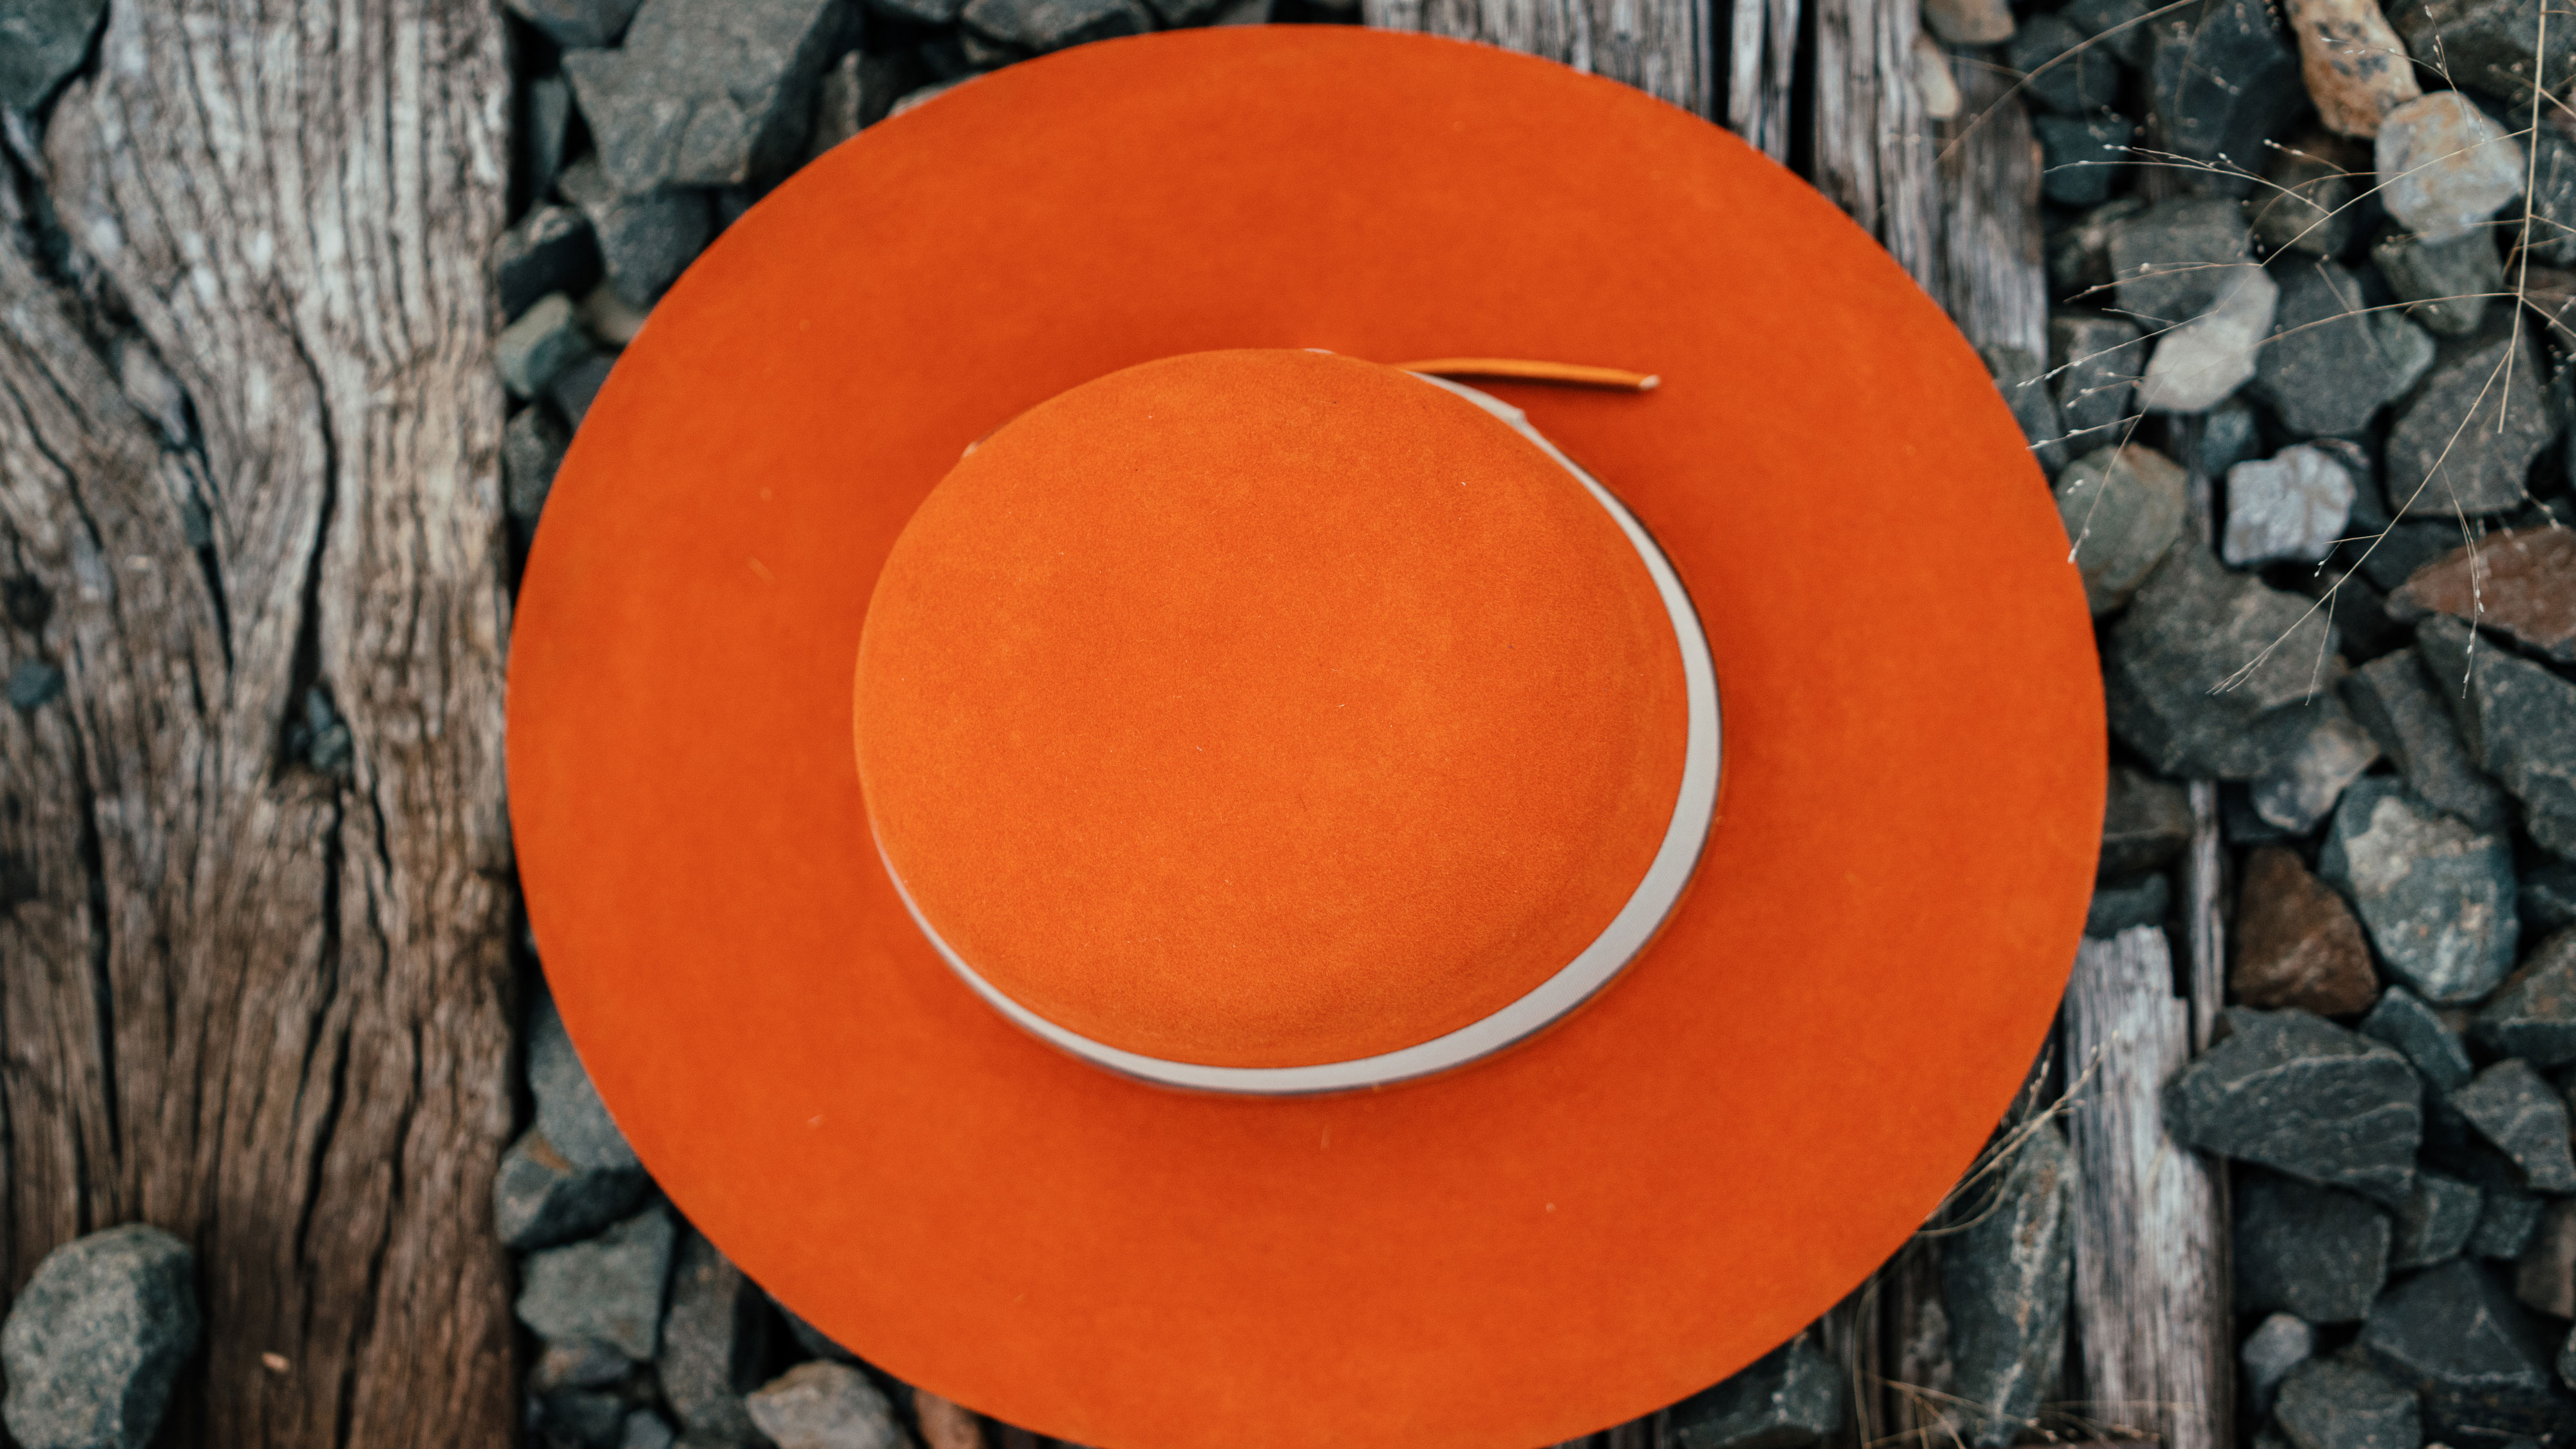 Design
100% Light Weight Dressed Beaver Fur Felt. A Vibrant atomic tangerine color adorned with a thin Italian cognac leather band. A subtle but distinctive mother-of-pearl button dots the band and draws the eye. Will brighten your day. 
Material
100% Light Weight Dressed Beaver Fur Felt Hat sustainably acquired.
Specifications
100%  Light Weight Dressed Beaver Fur Felt Hat. 4 1/2- 4 3/4 open crown 4 brim. A handsome towering crown with a lengthy brim finished off with a thin tone on tone leather band and distinctive mother-of-pearl. Handcrafted in our NYC atelier. Please allow 3-4 weeks to custom make this special piece.